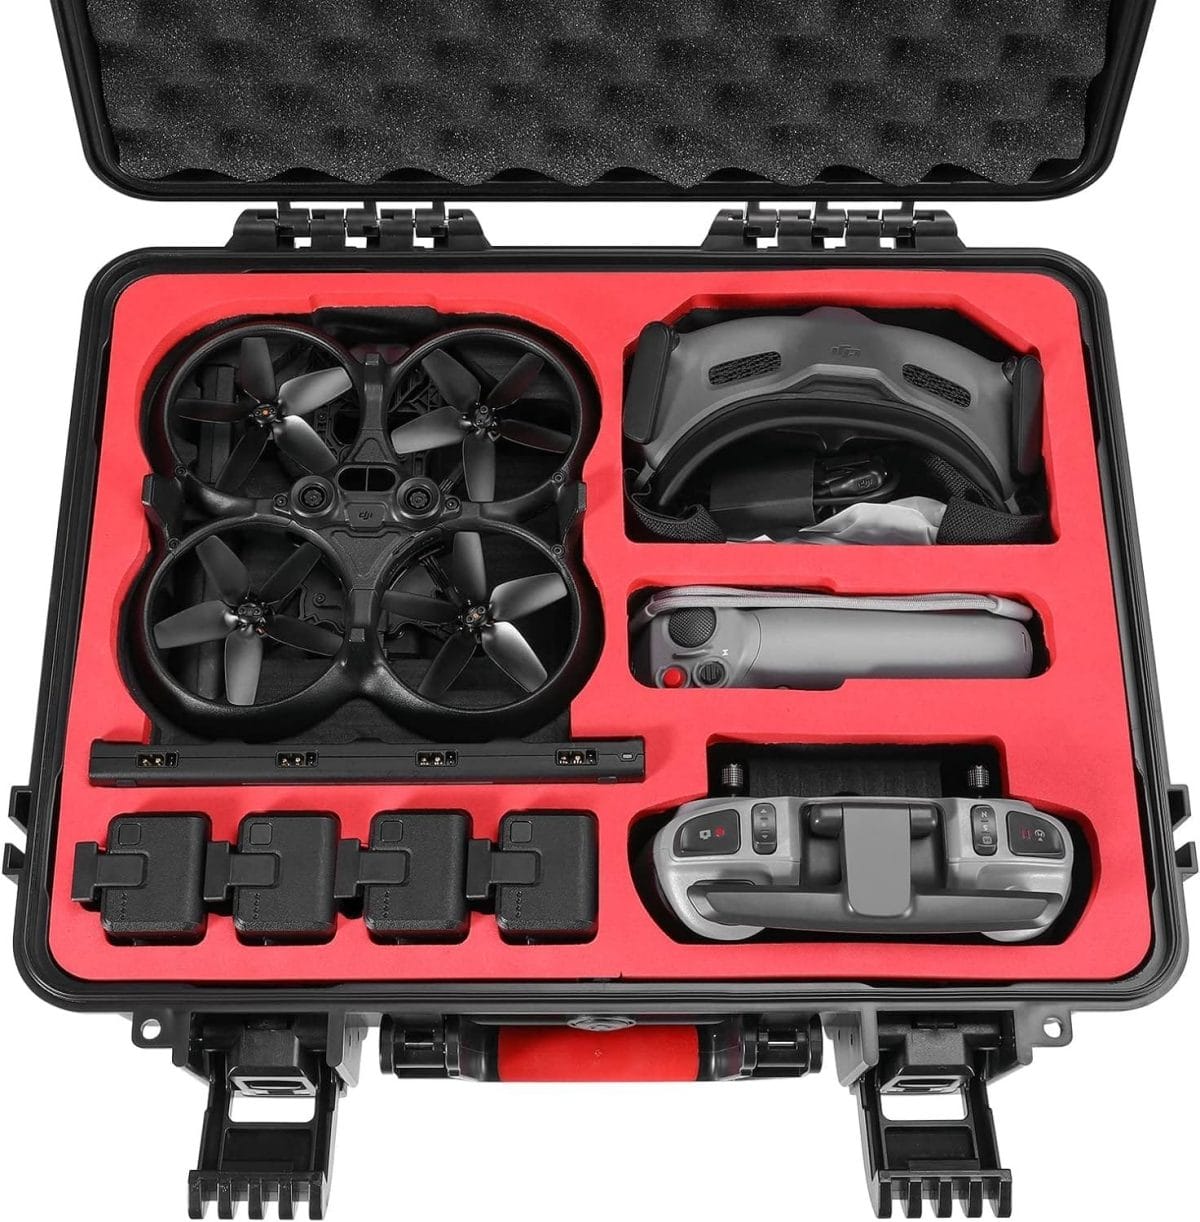 Skyreat Avata Case for DJI Avata Pro-View Combo(DJI Goggles 2) with FPV Controller, Waterpoof Hard Carrying Bag for DJI Avata Mini FPV Drone Accessories